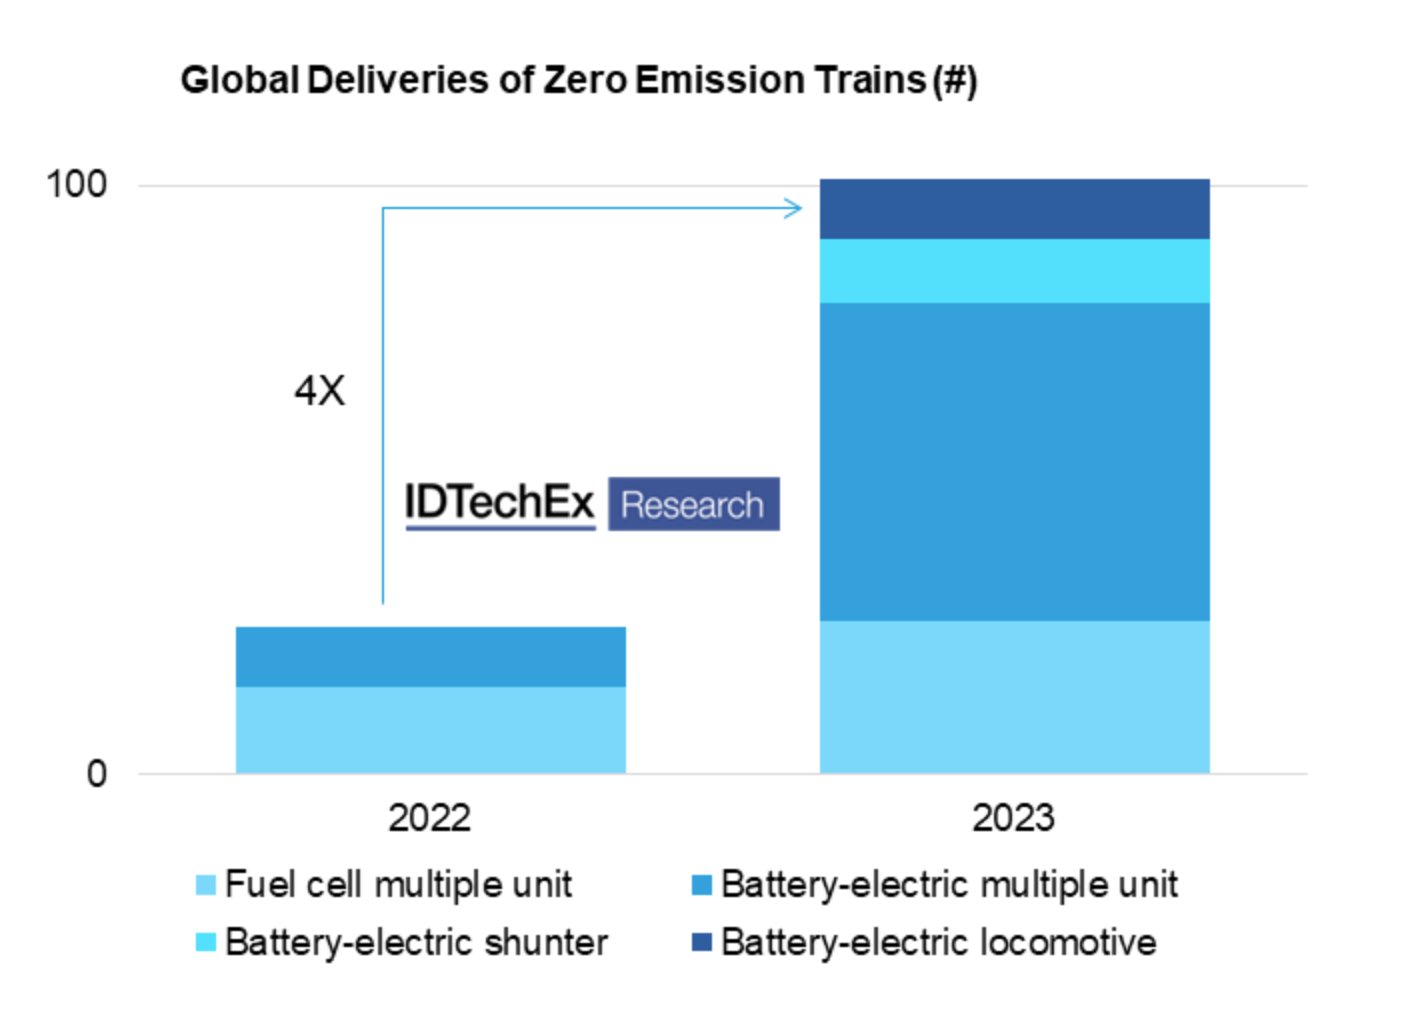 Battery Electric Train Deliveries on Track to Quadruple in 2023